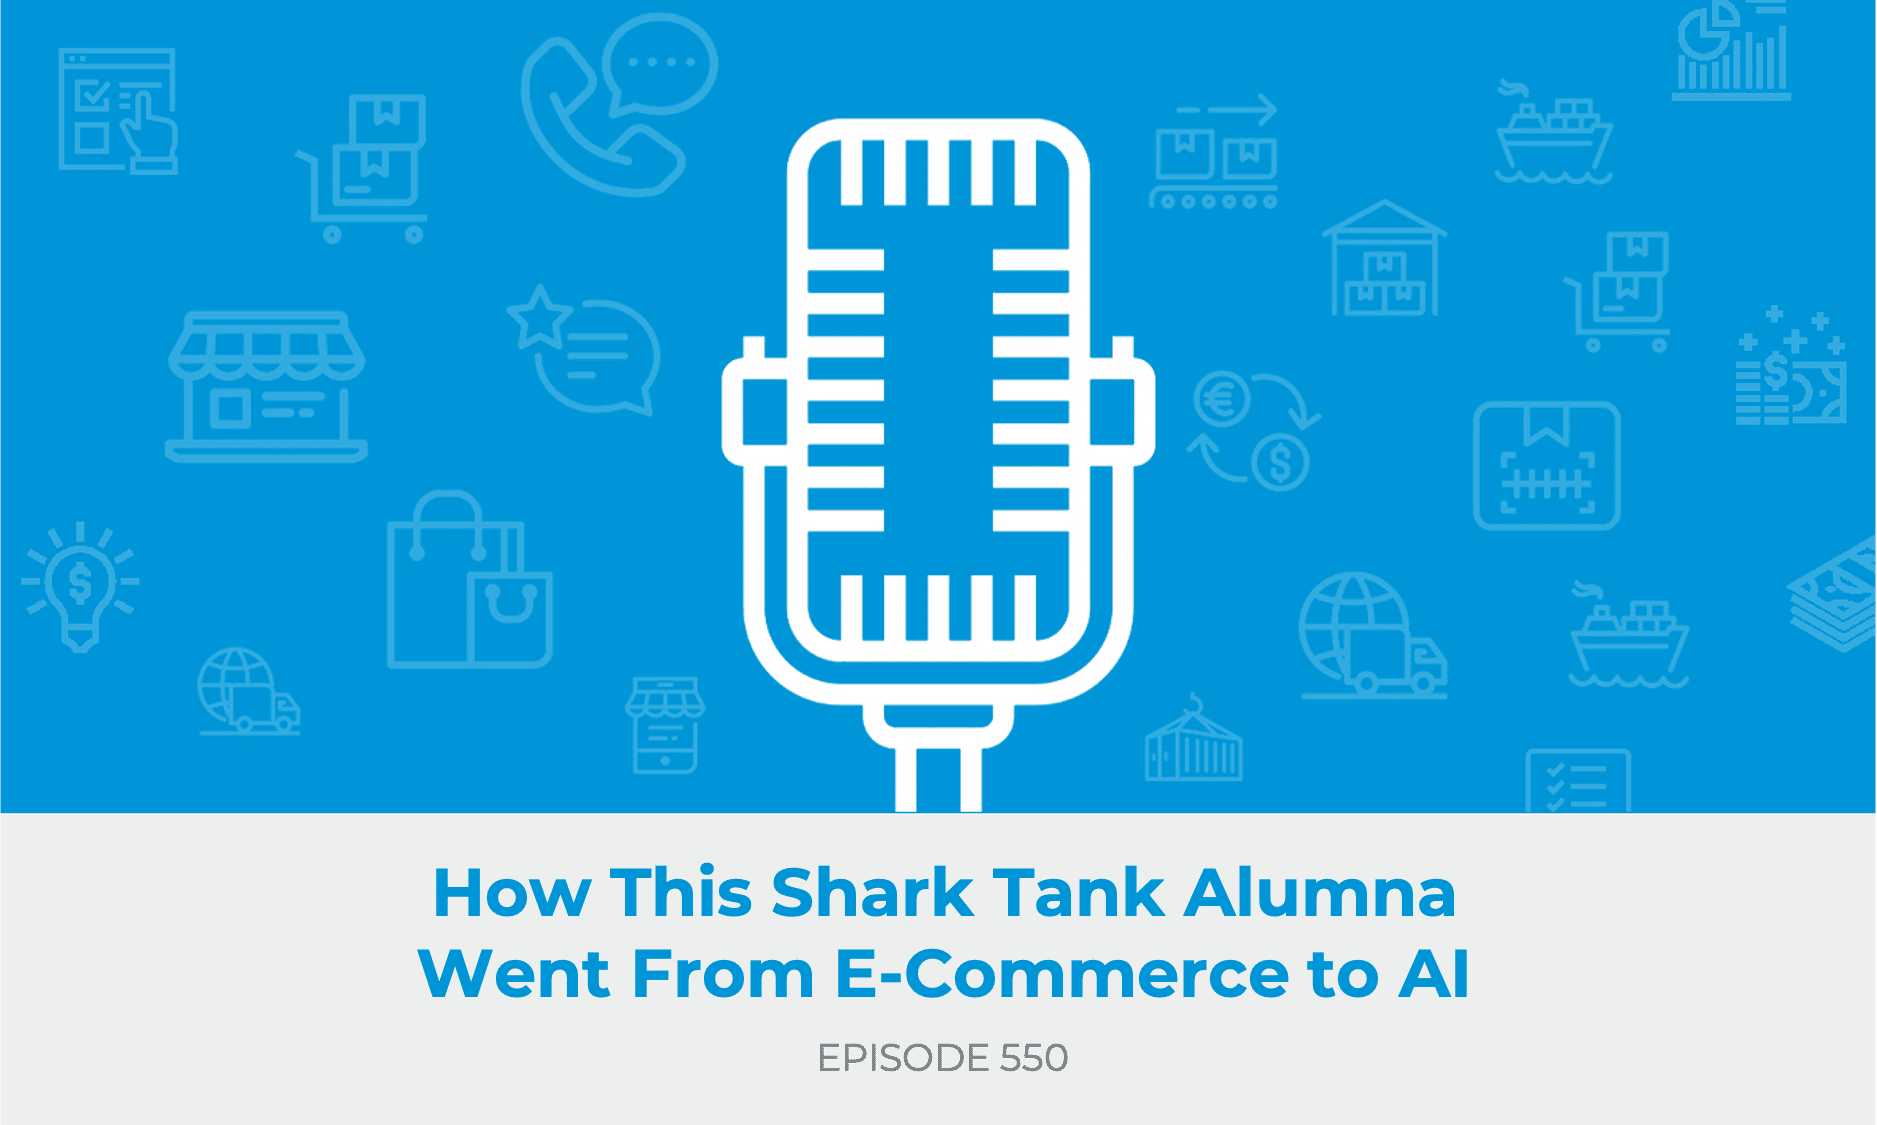 The image is of a white microphone with a blue background. Under the microphone is the title of the podcast "How This Shark Tank Alumna Went From E-Commerce to AI".